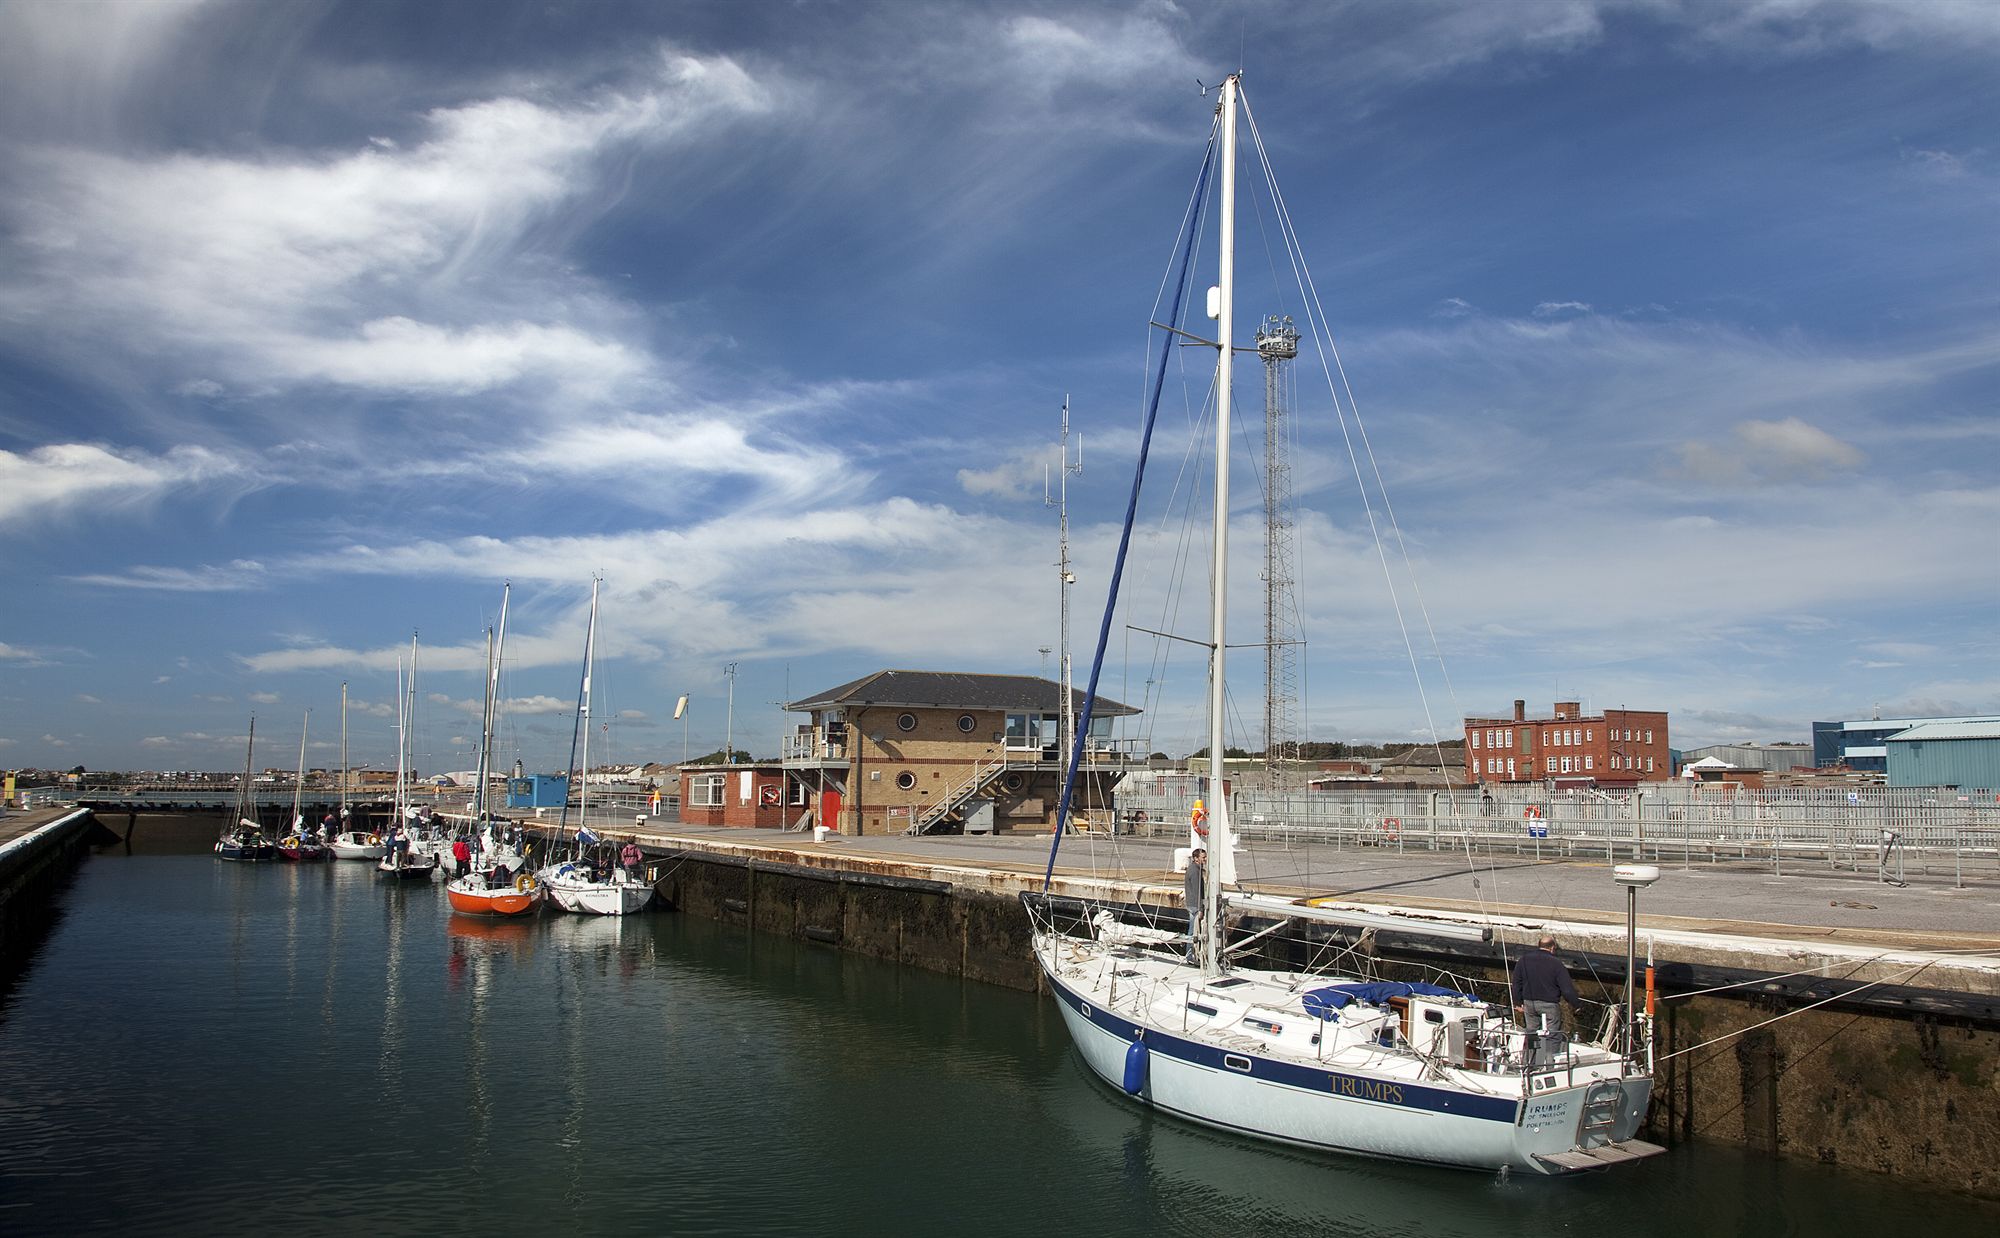 Shoreham Port improves service to leisure users with new marina management system